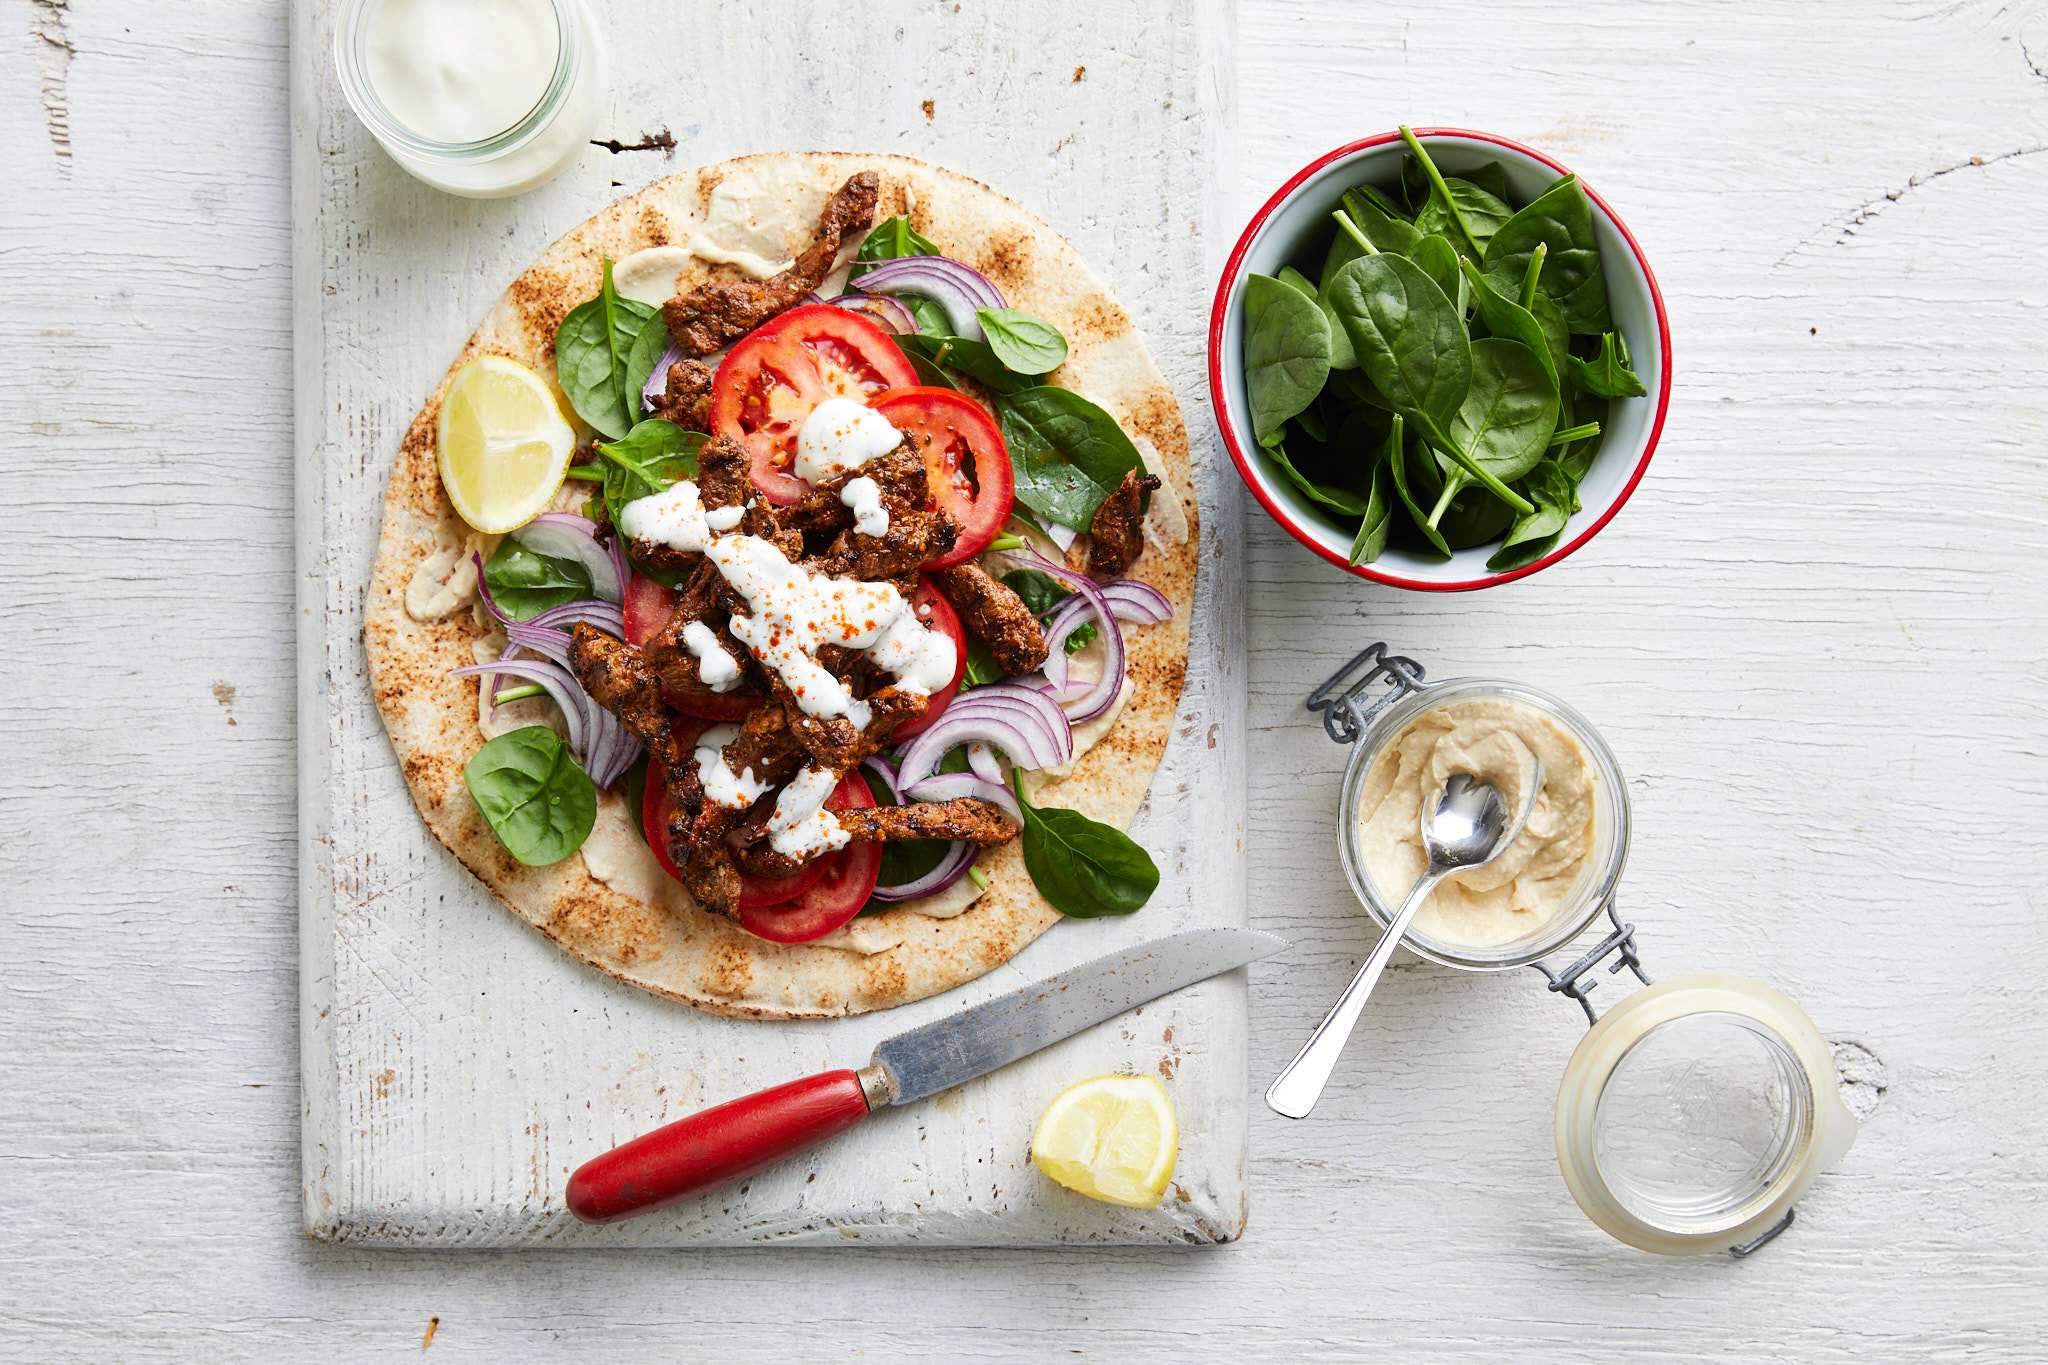  mouthwatering souvlaki featuring lamb, colorful vegetables, and salad